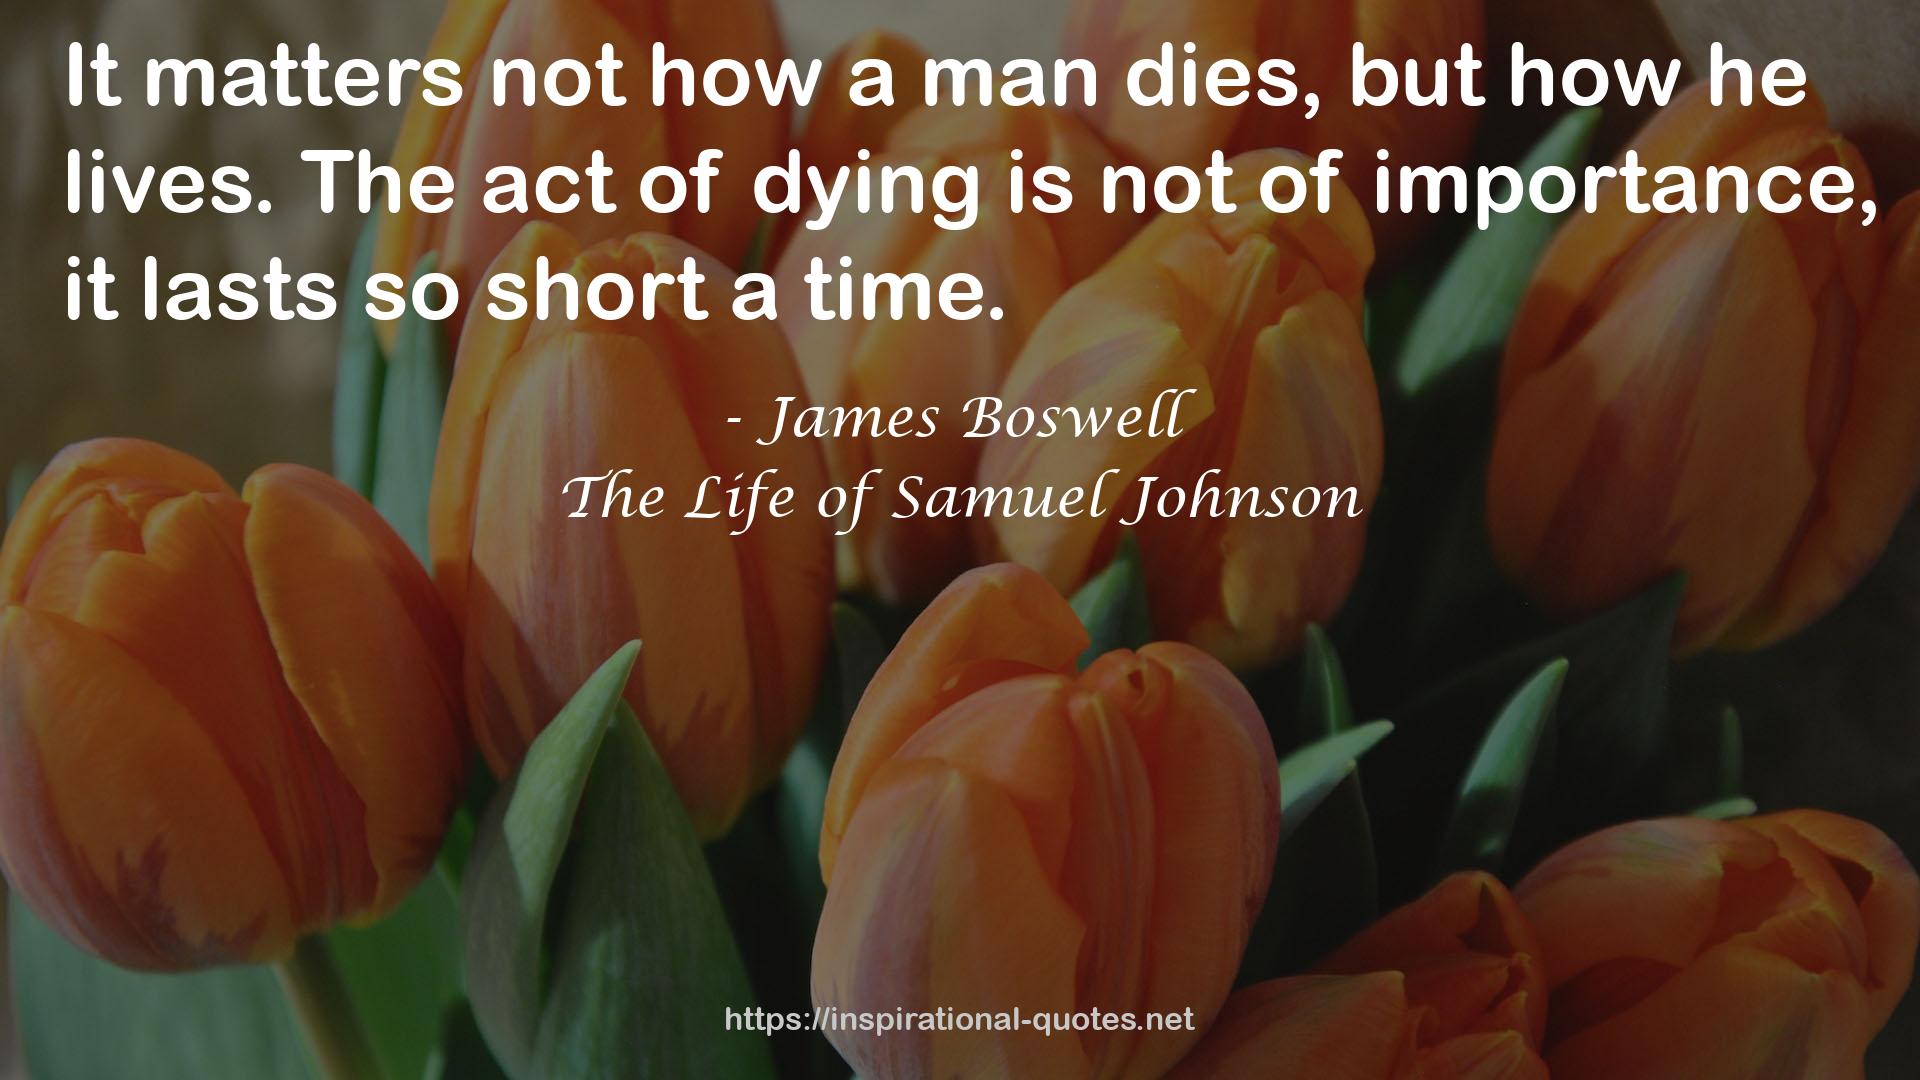 The Life of Samuel Johnson QUOTES